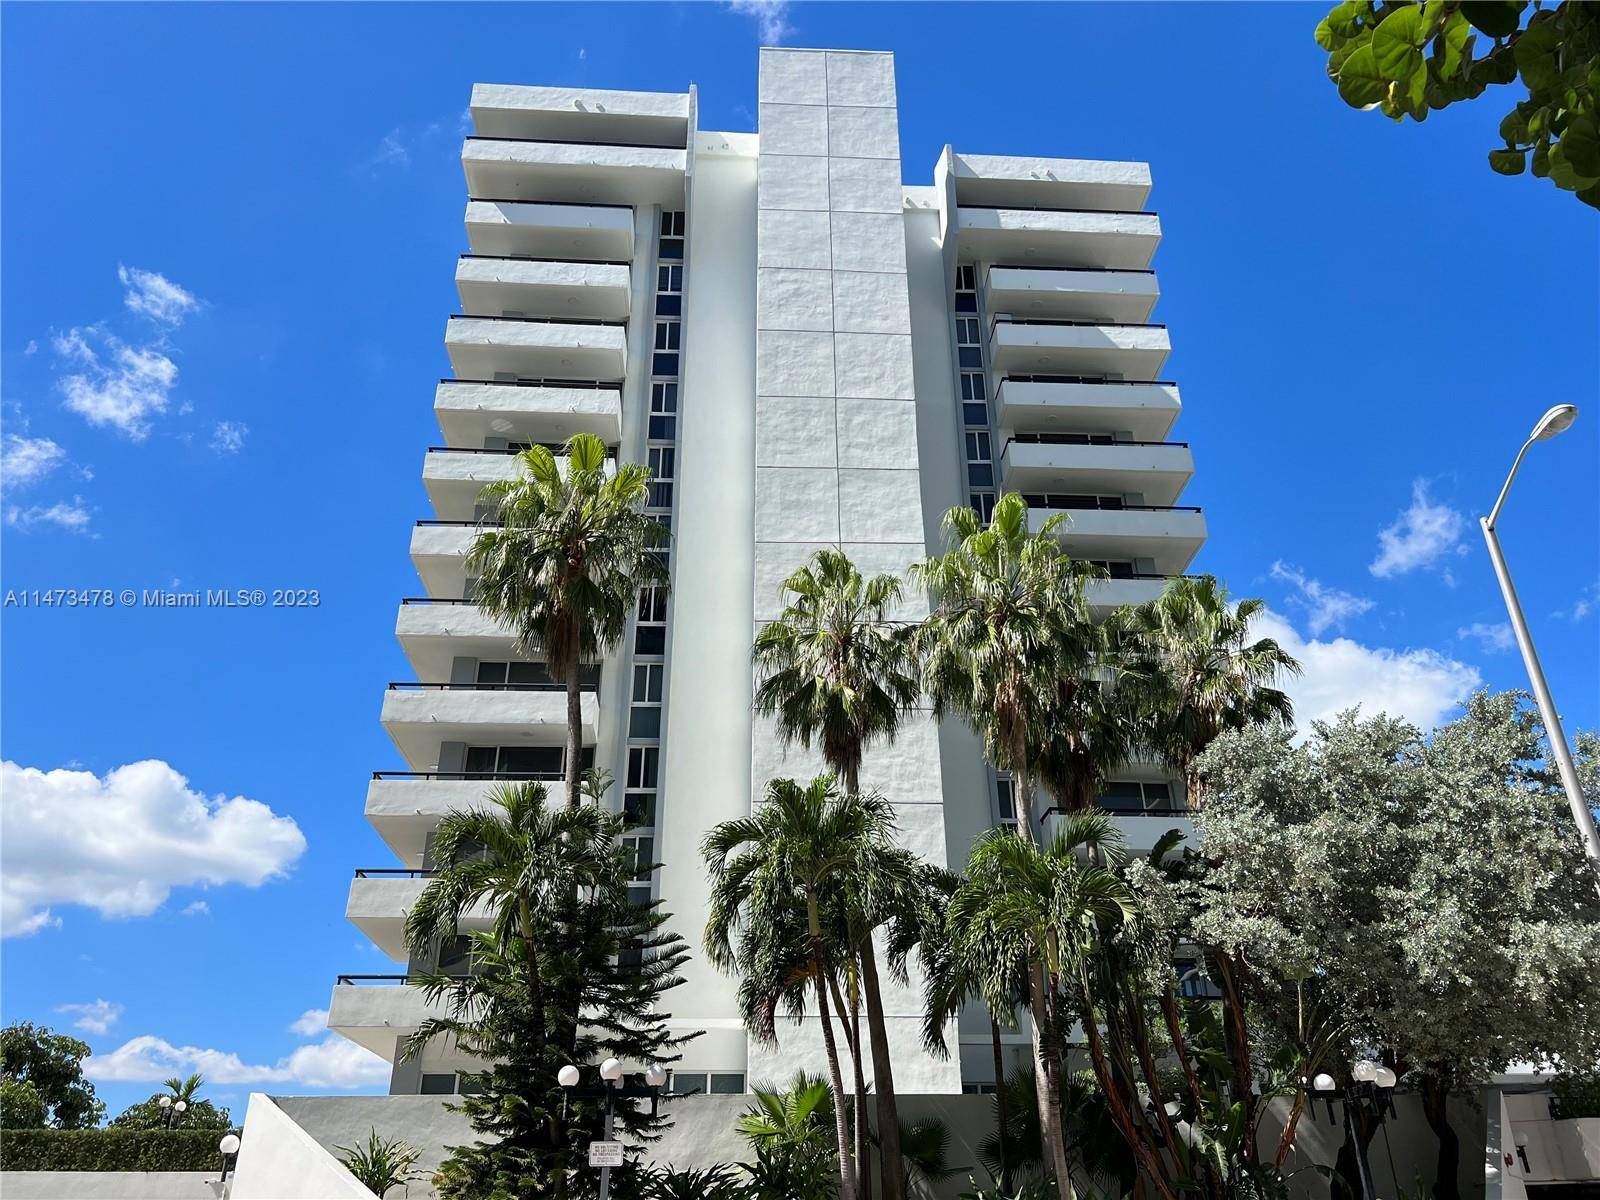 Unique opportunity to rent a 2 2 penthouse corner unit at Portugal Towers, with wraparound balcony that offers spectacular views of Indian Creek, Collins Ave, the Miami skyline and the ...